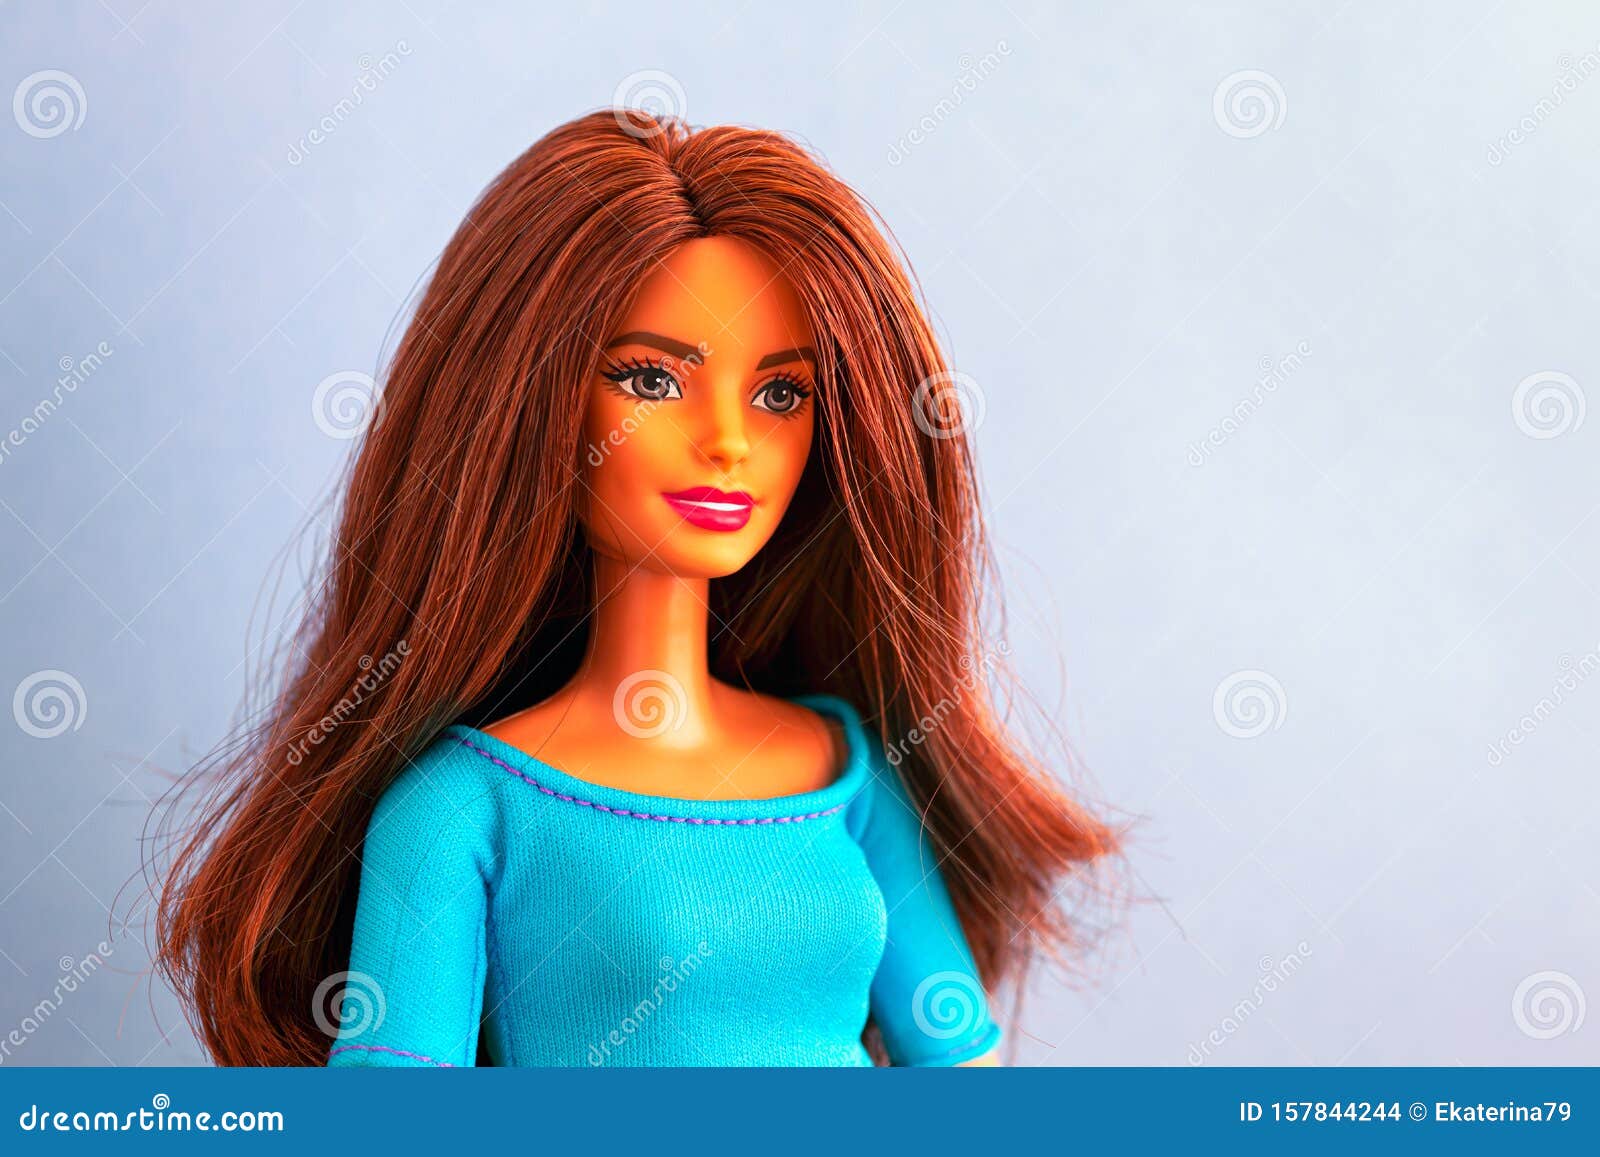 Portrait of Barbie Doll with Brown Hair Against Blue Background Editorial  Stock Image - Image of beauty, head: 157844244